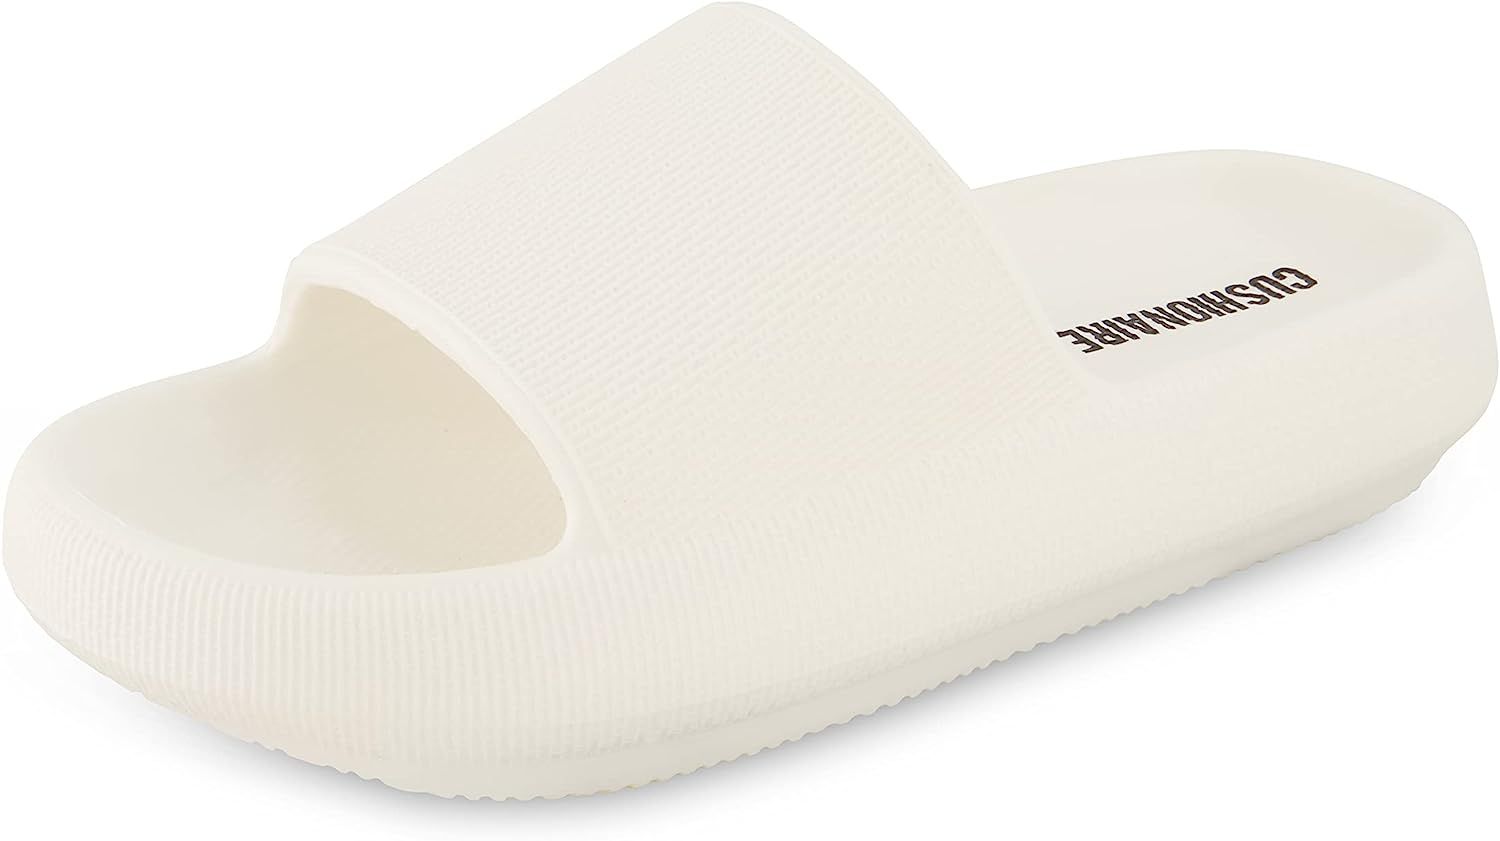 CUSHIONAIRE Women's Feather recovery slide sandals with +Comfort | Amazon (US)